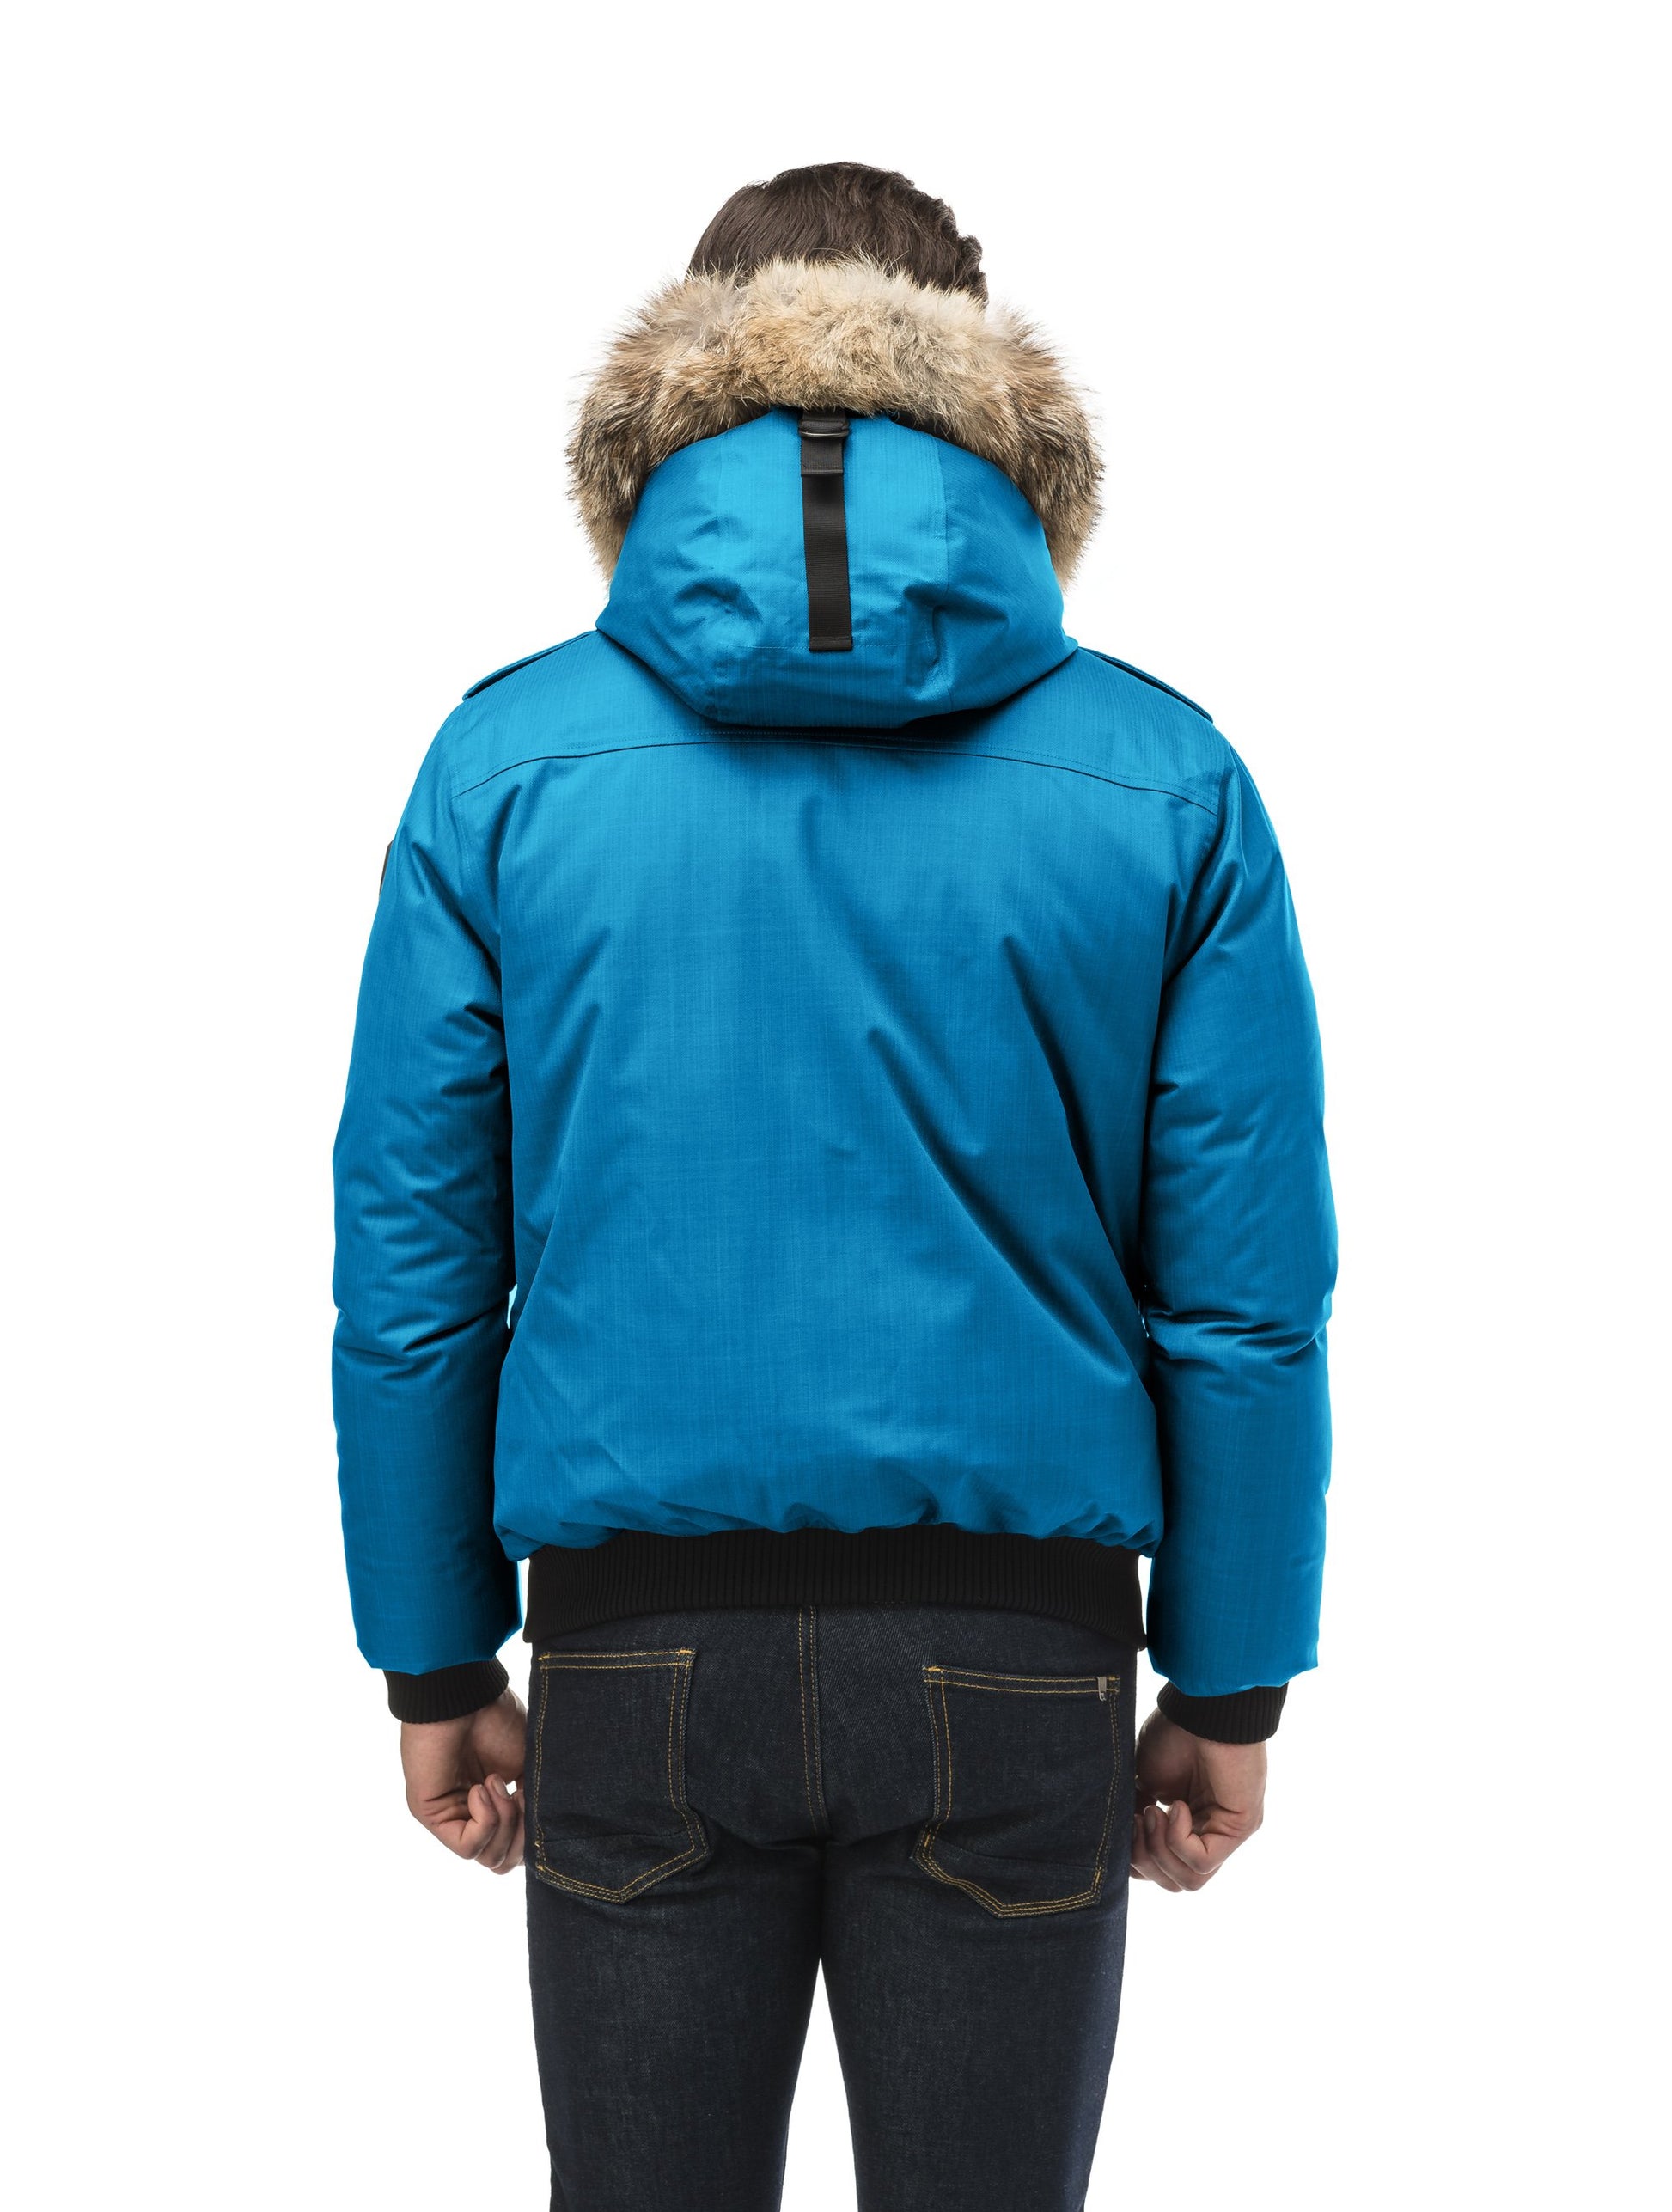 Men's down filled bomber that sits just above the hips with a completely removable hood that's windproof, waterproof, and breathable in Sea Blue